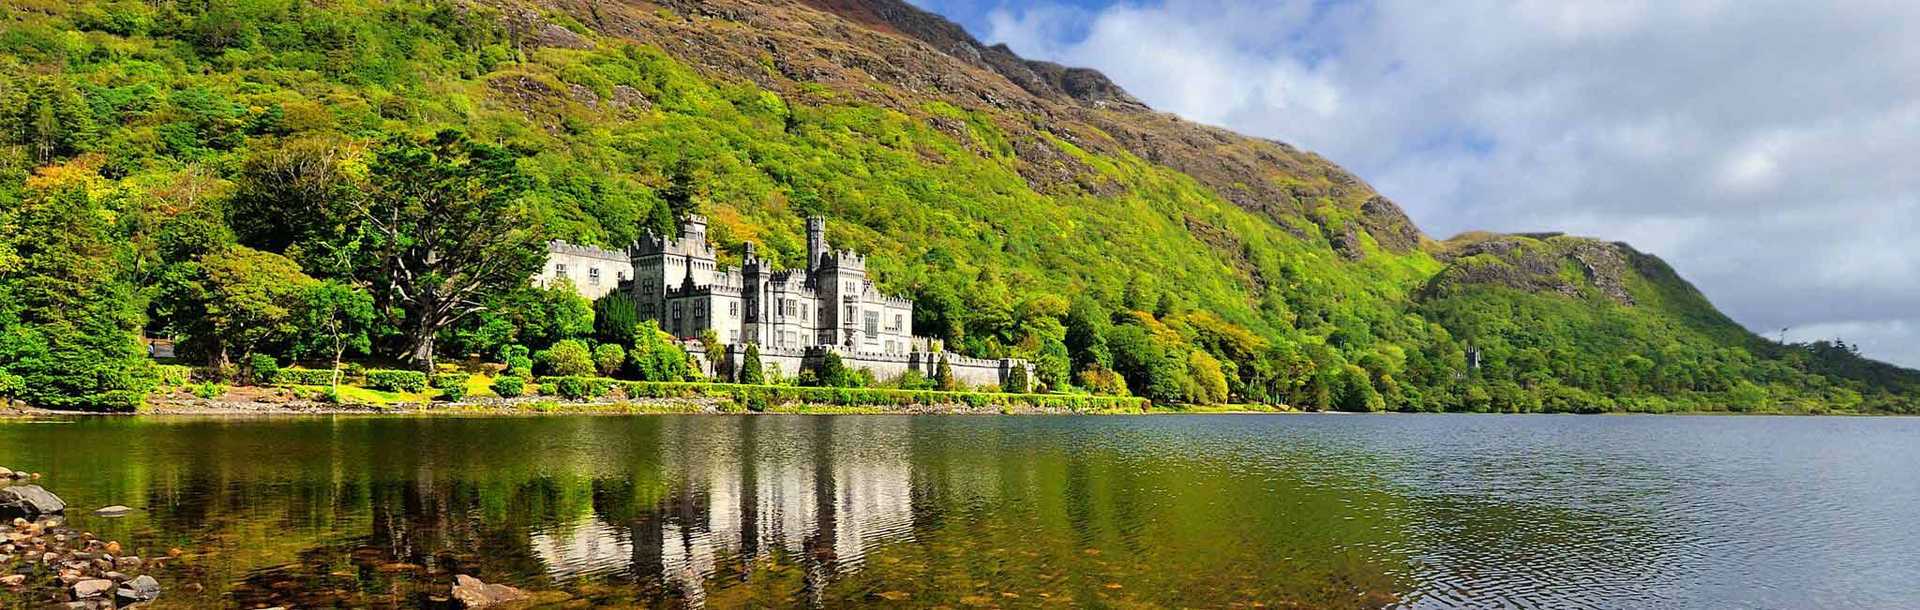 View of Kylemore Abbey in Galway, Ireland.